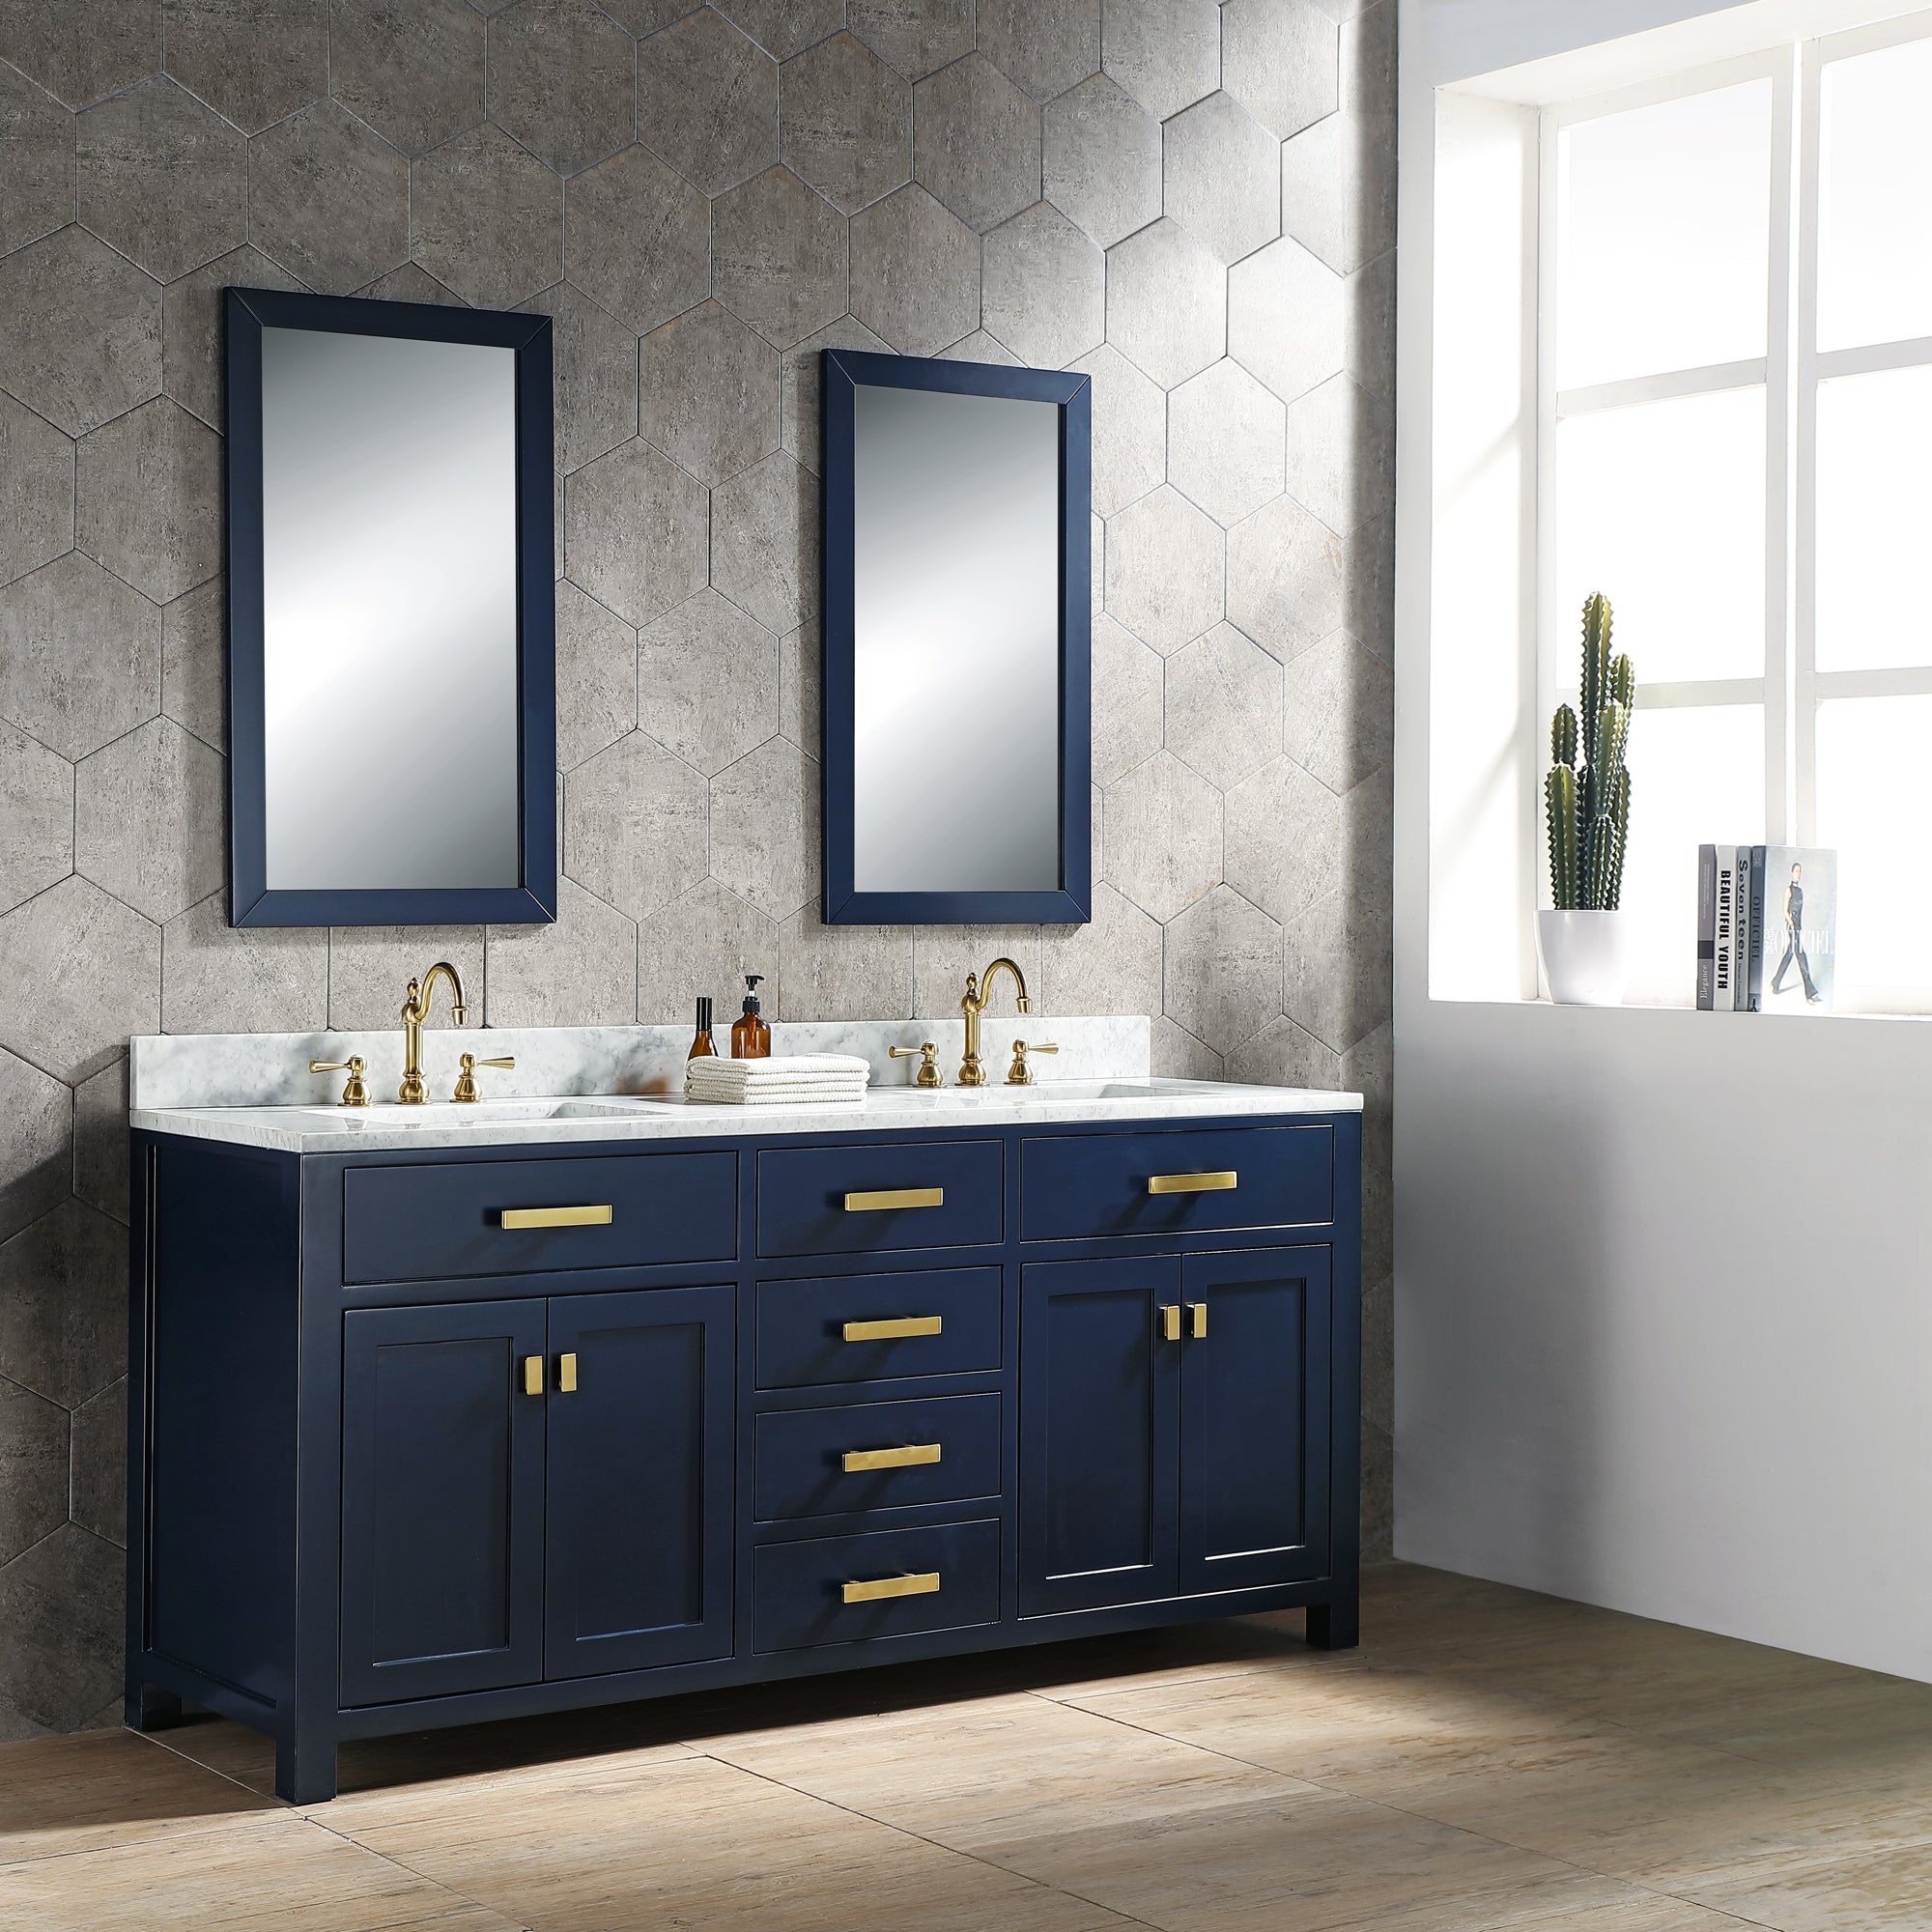 Water Creation | Madison 72-Inch Double Sink Carrara White Marble Vanity In Monarch Blue With Matching Mirror(s) and F2-0012-06-TL Lavatory Faucet(s) | MS72CW06MB-R21TL1206